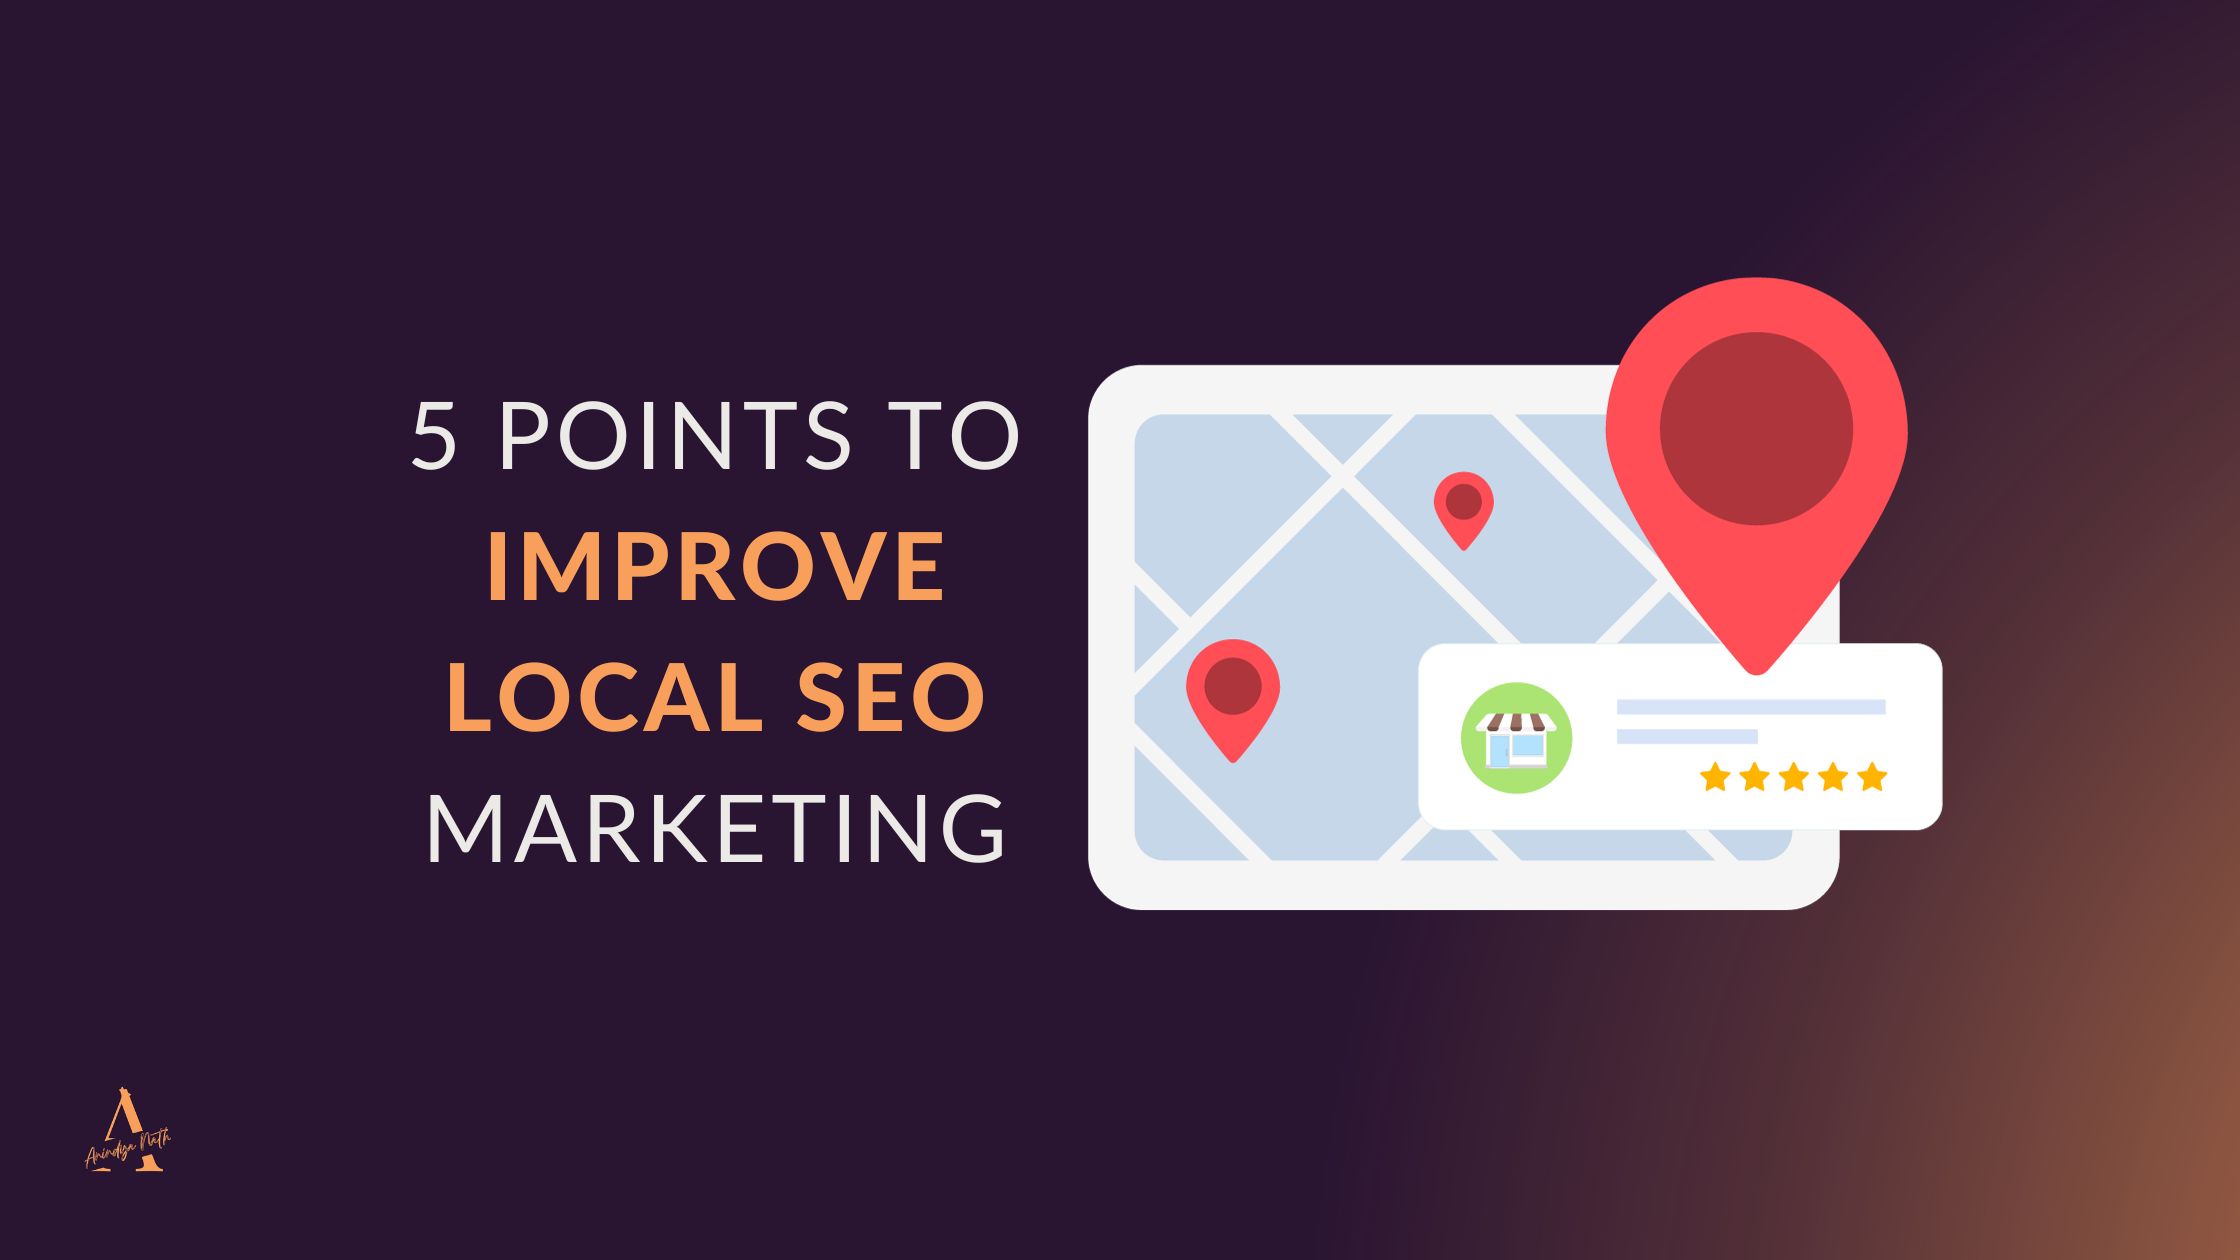 5 Points To Improve Local SEO Marketing